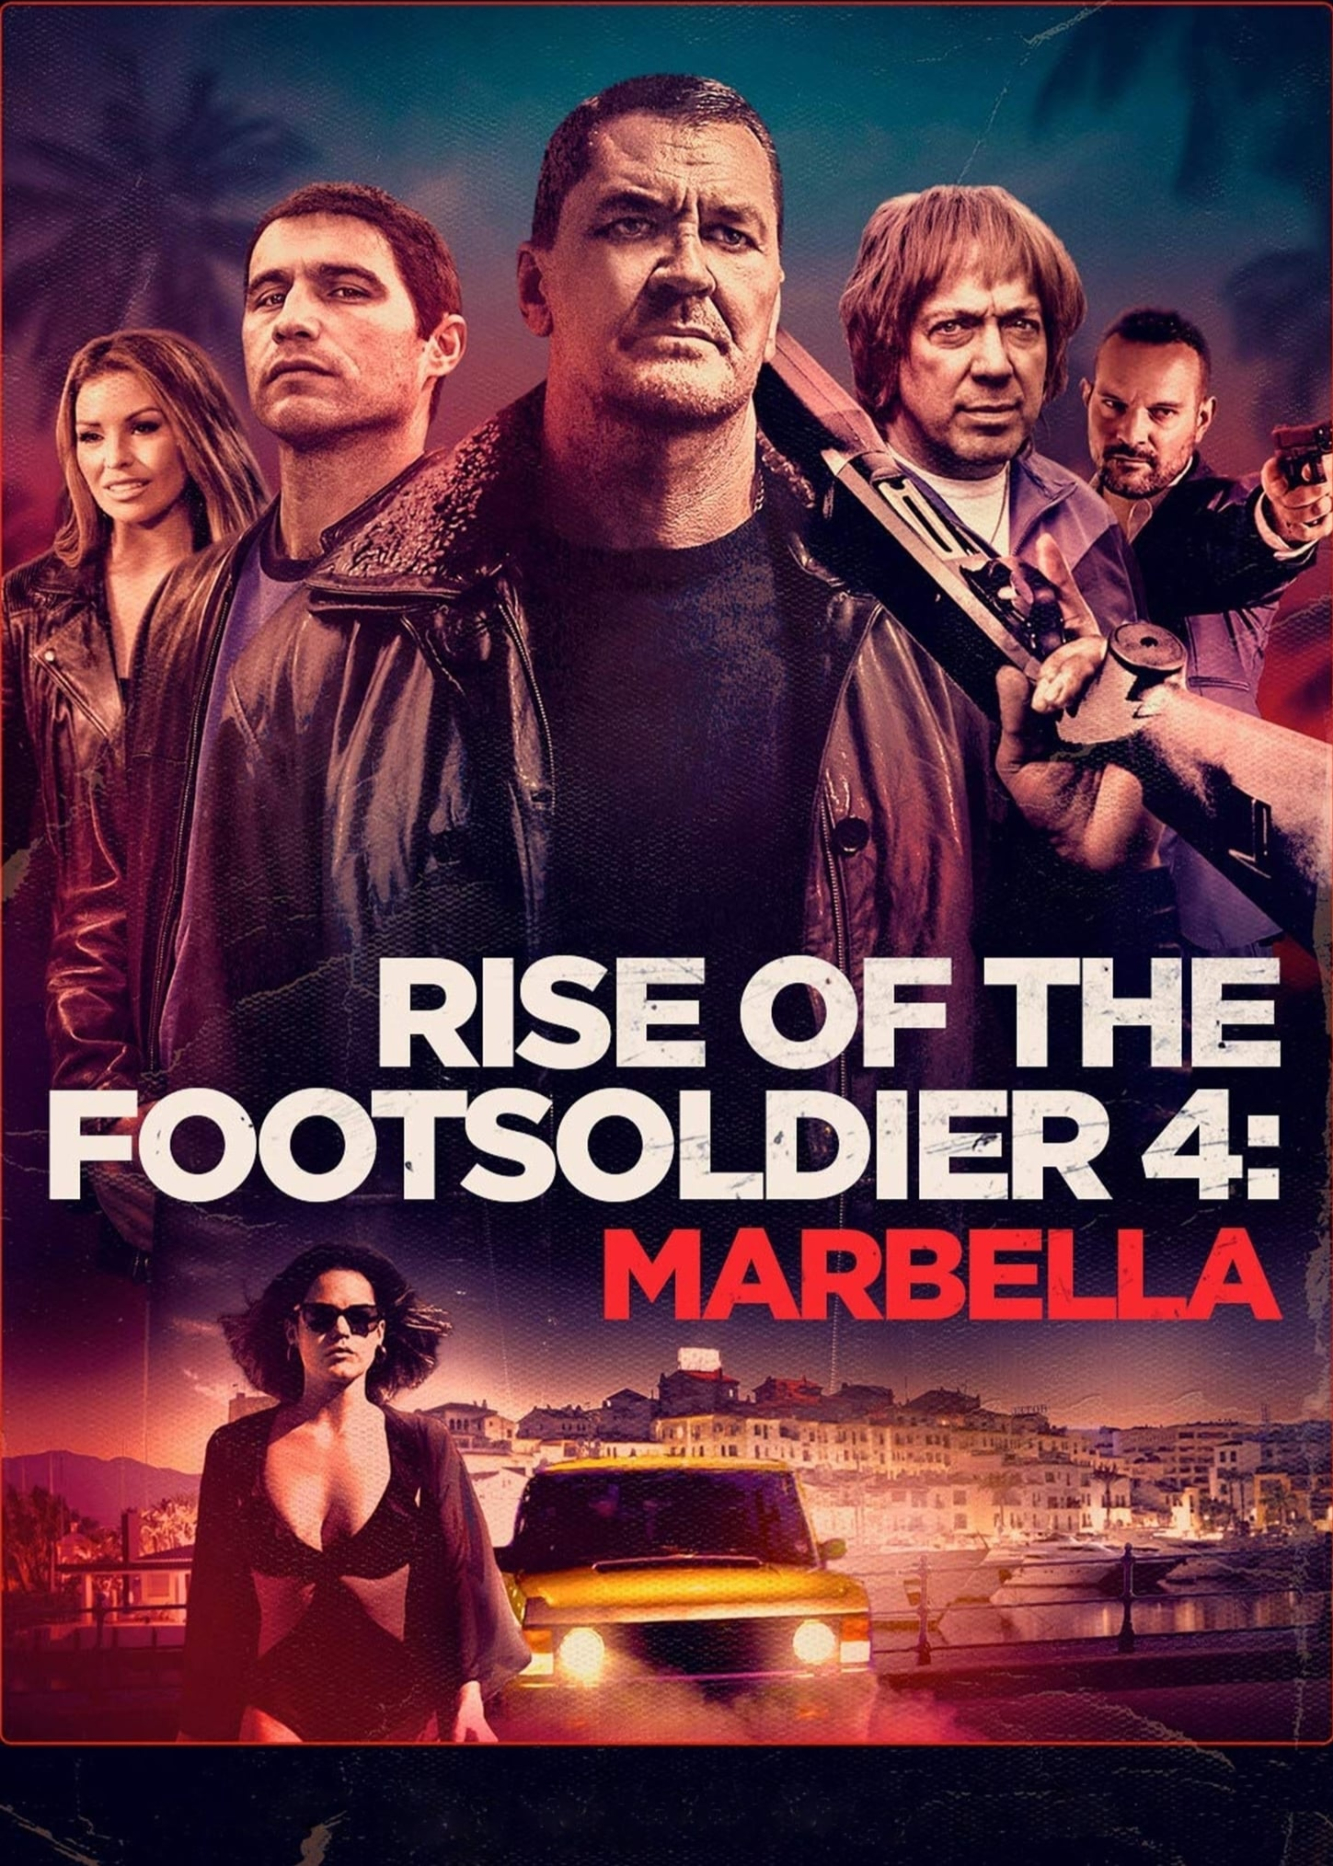 Poster Phim Rise of the Footsoldier 4: Marbella (Rise of the Footsoldier 4: Marbella)